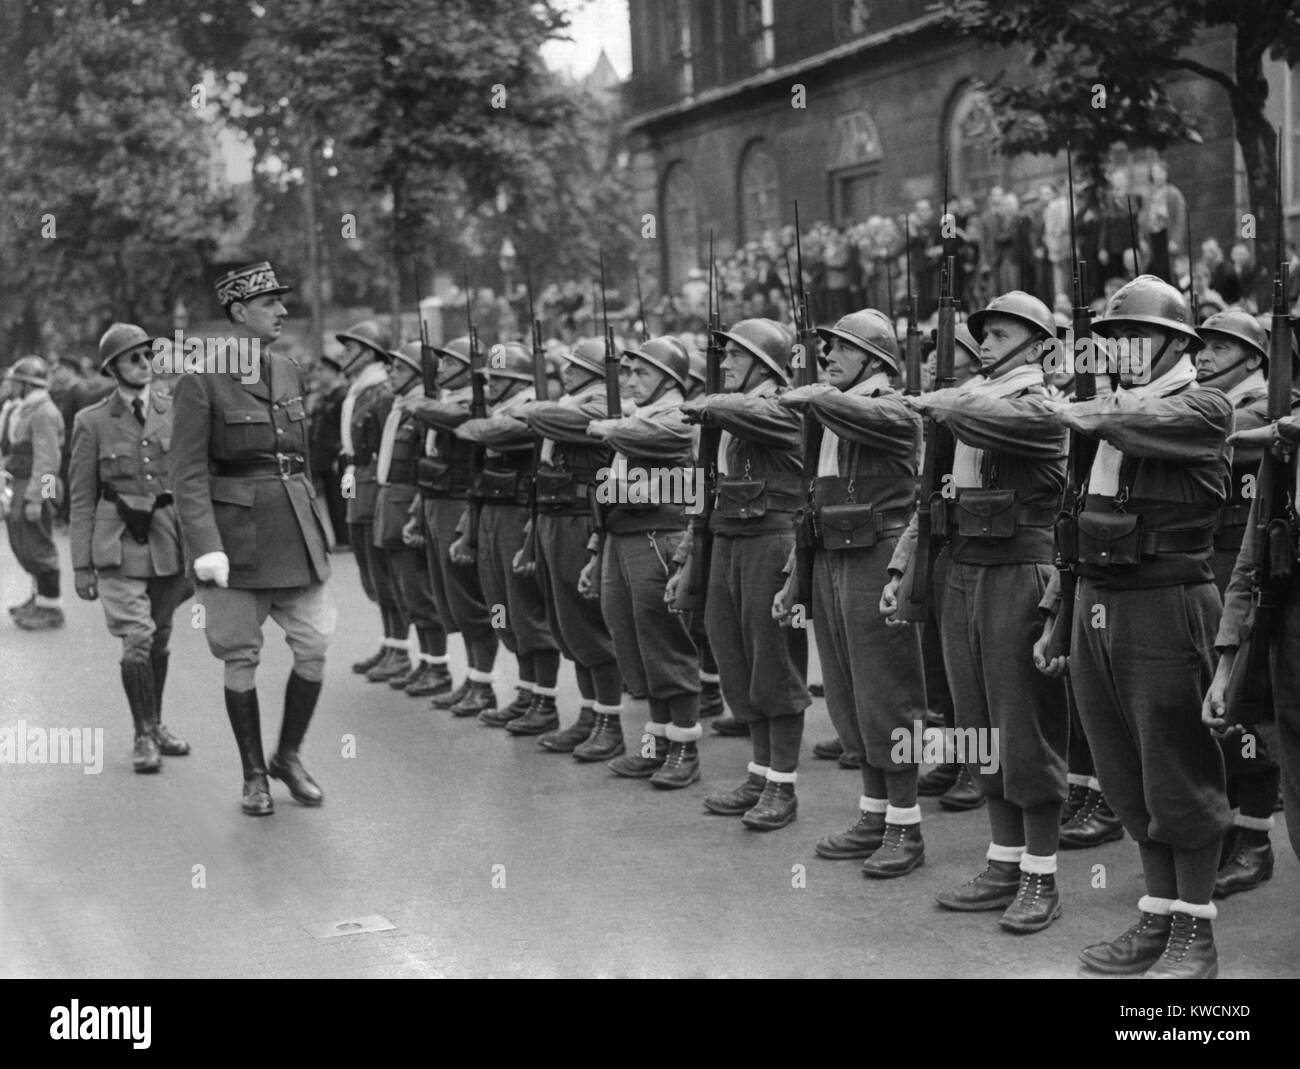 General Charles de Gaulle, inspecting Free French Forces during Bastille Day ceremonies in London. July 14, 1940. - (BSLOC 2014 15 235) Stock Photo